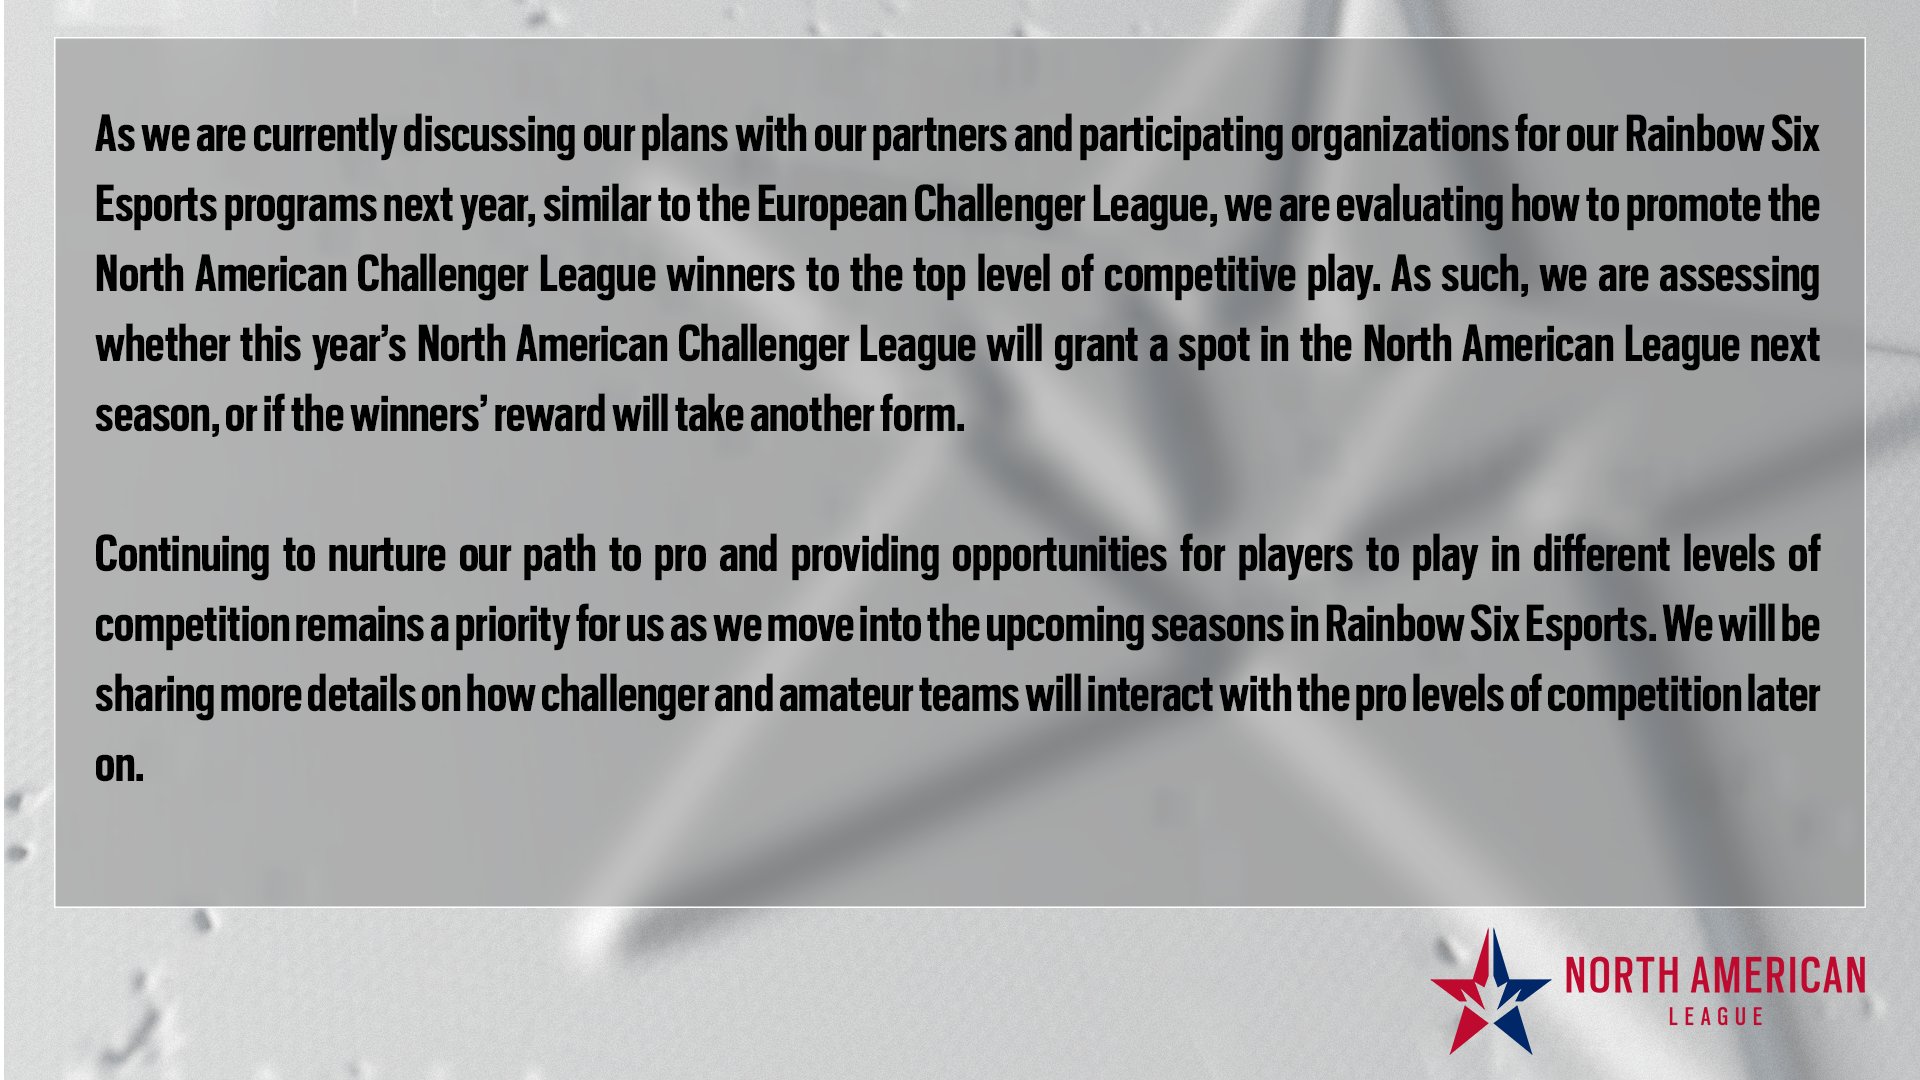 As we are currently discussing our plans with our partners and participating organizations for our Rainbow Six Esports programs next year, similar to the European Challenger League, we are evaluating how to promote the North American Challenger League winners to the top level of competitive play. As such, we are assessing whether this year’s North American Challenger League will grant a spot in the North American League next season, or if the winners’ reward will take another form.

Continuing to nurture our path to pro and providing opportunities for players to play in different levels of competition remains a priority for us as we move into the upcoming seasons in Rainbow Six Esports. We will be sharing more details on how challenger and amateur teams will interact with the pro levels of competition later on.